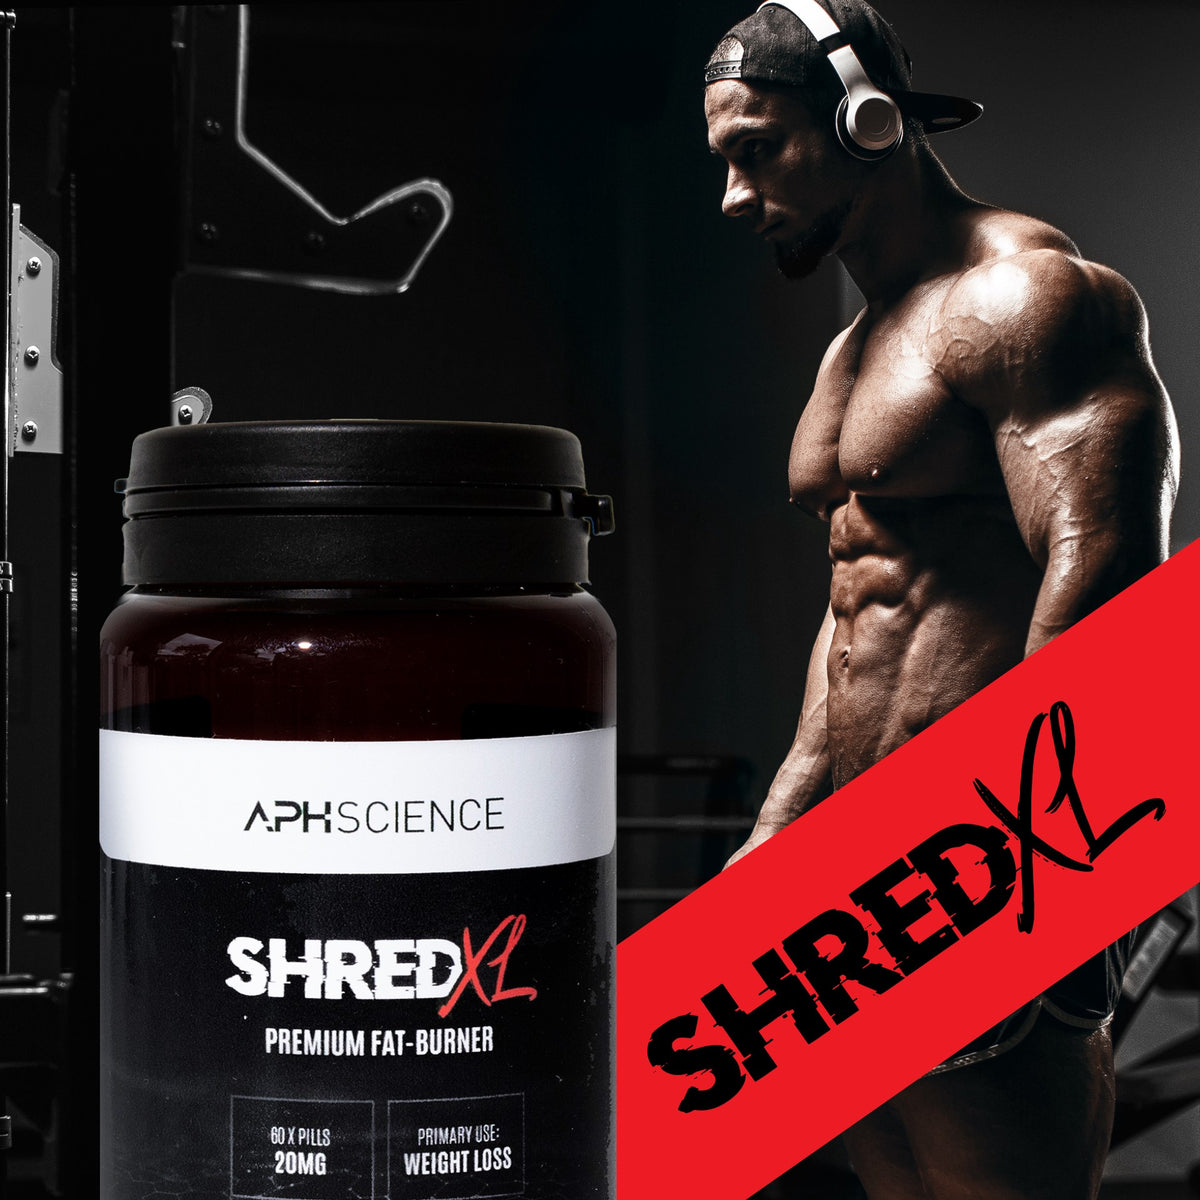 SHRED XL - APH Science